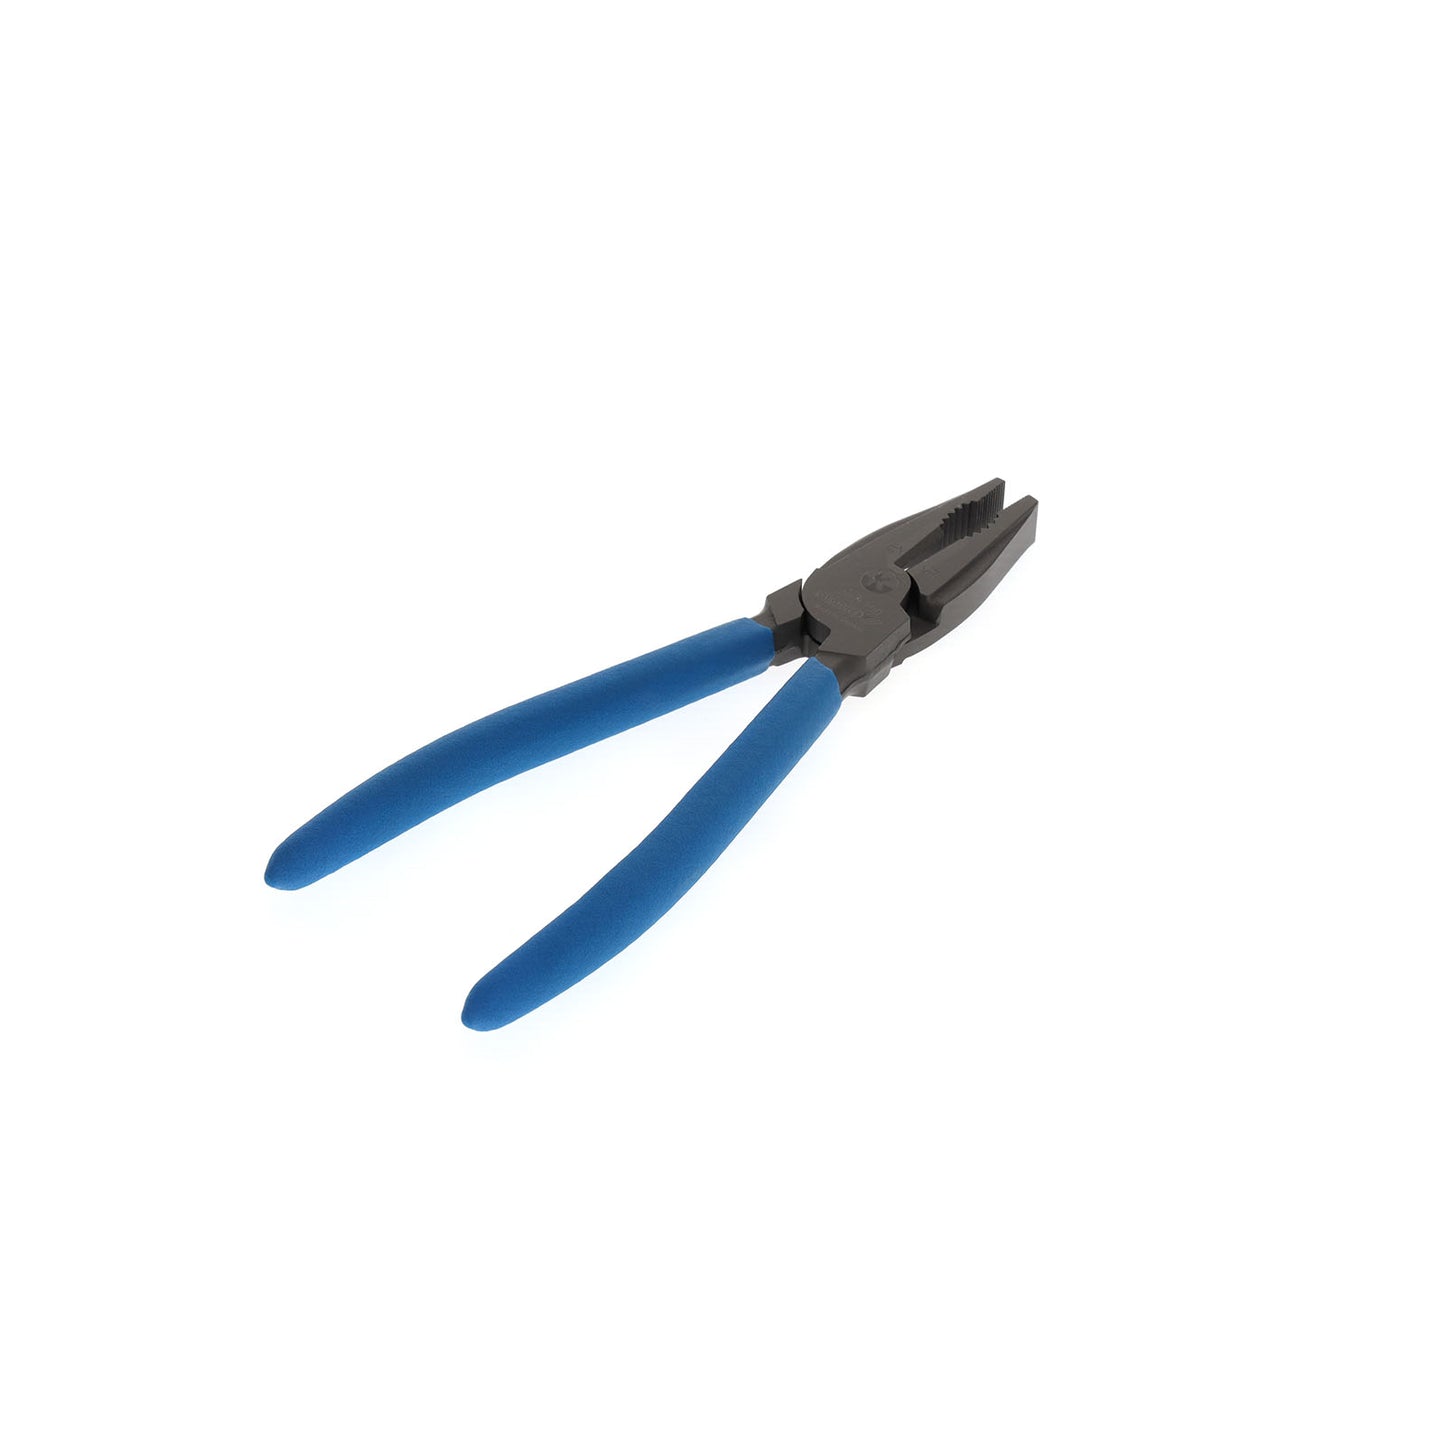 GEDORE 8250-200 TL - Universal force pliers 200 mm (6707740)